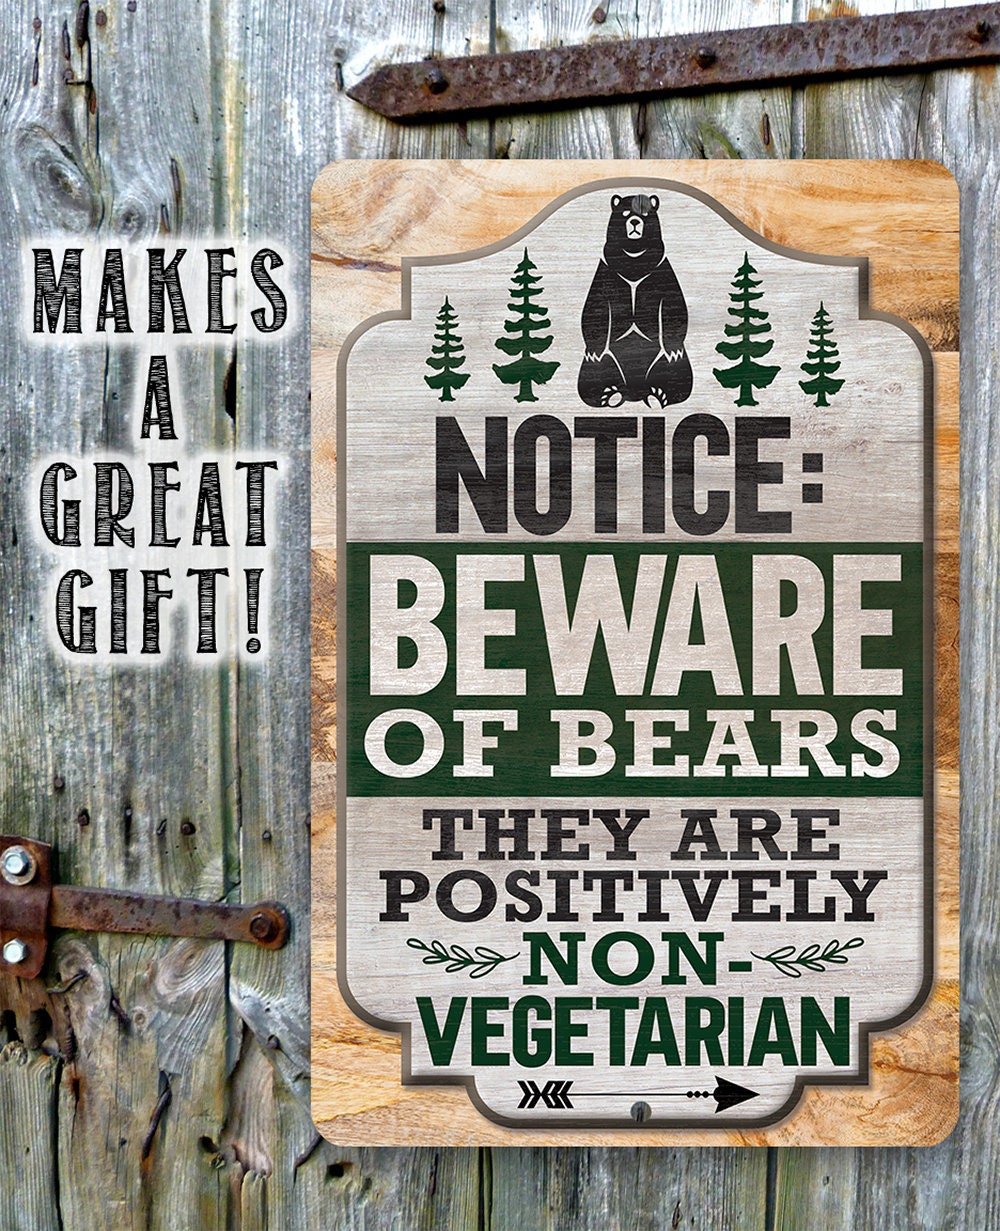 Notice: Beware of Bears, They Are Positively Non-Vegetarian - Metal Sign Metal Sign Lone Star Art 